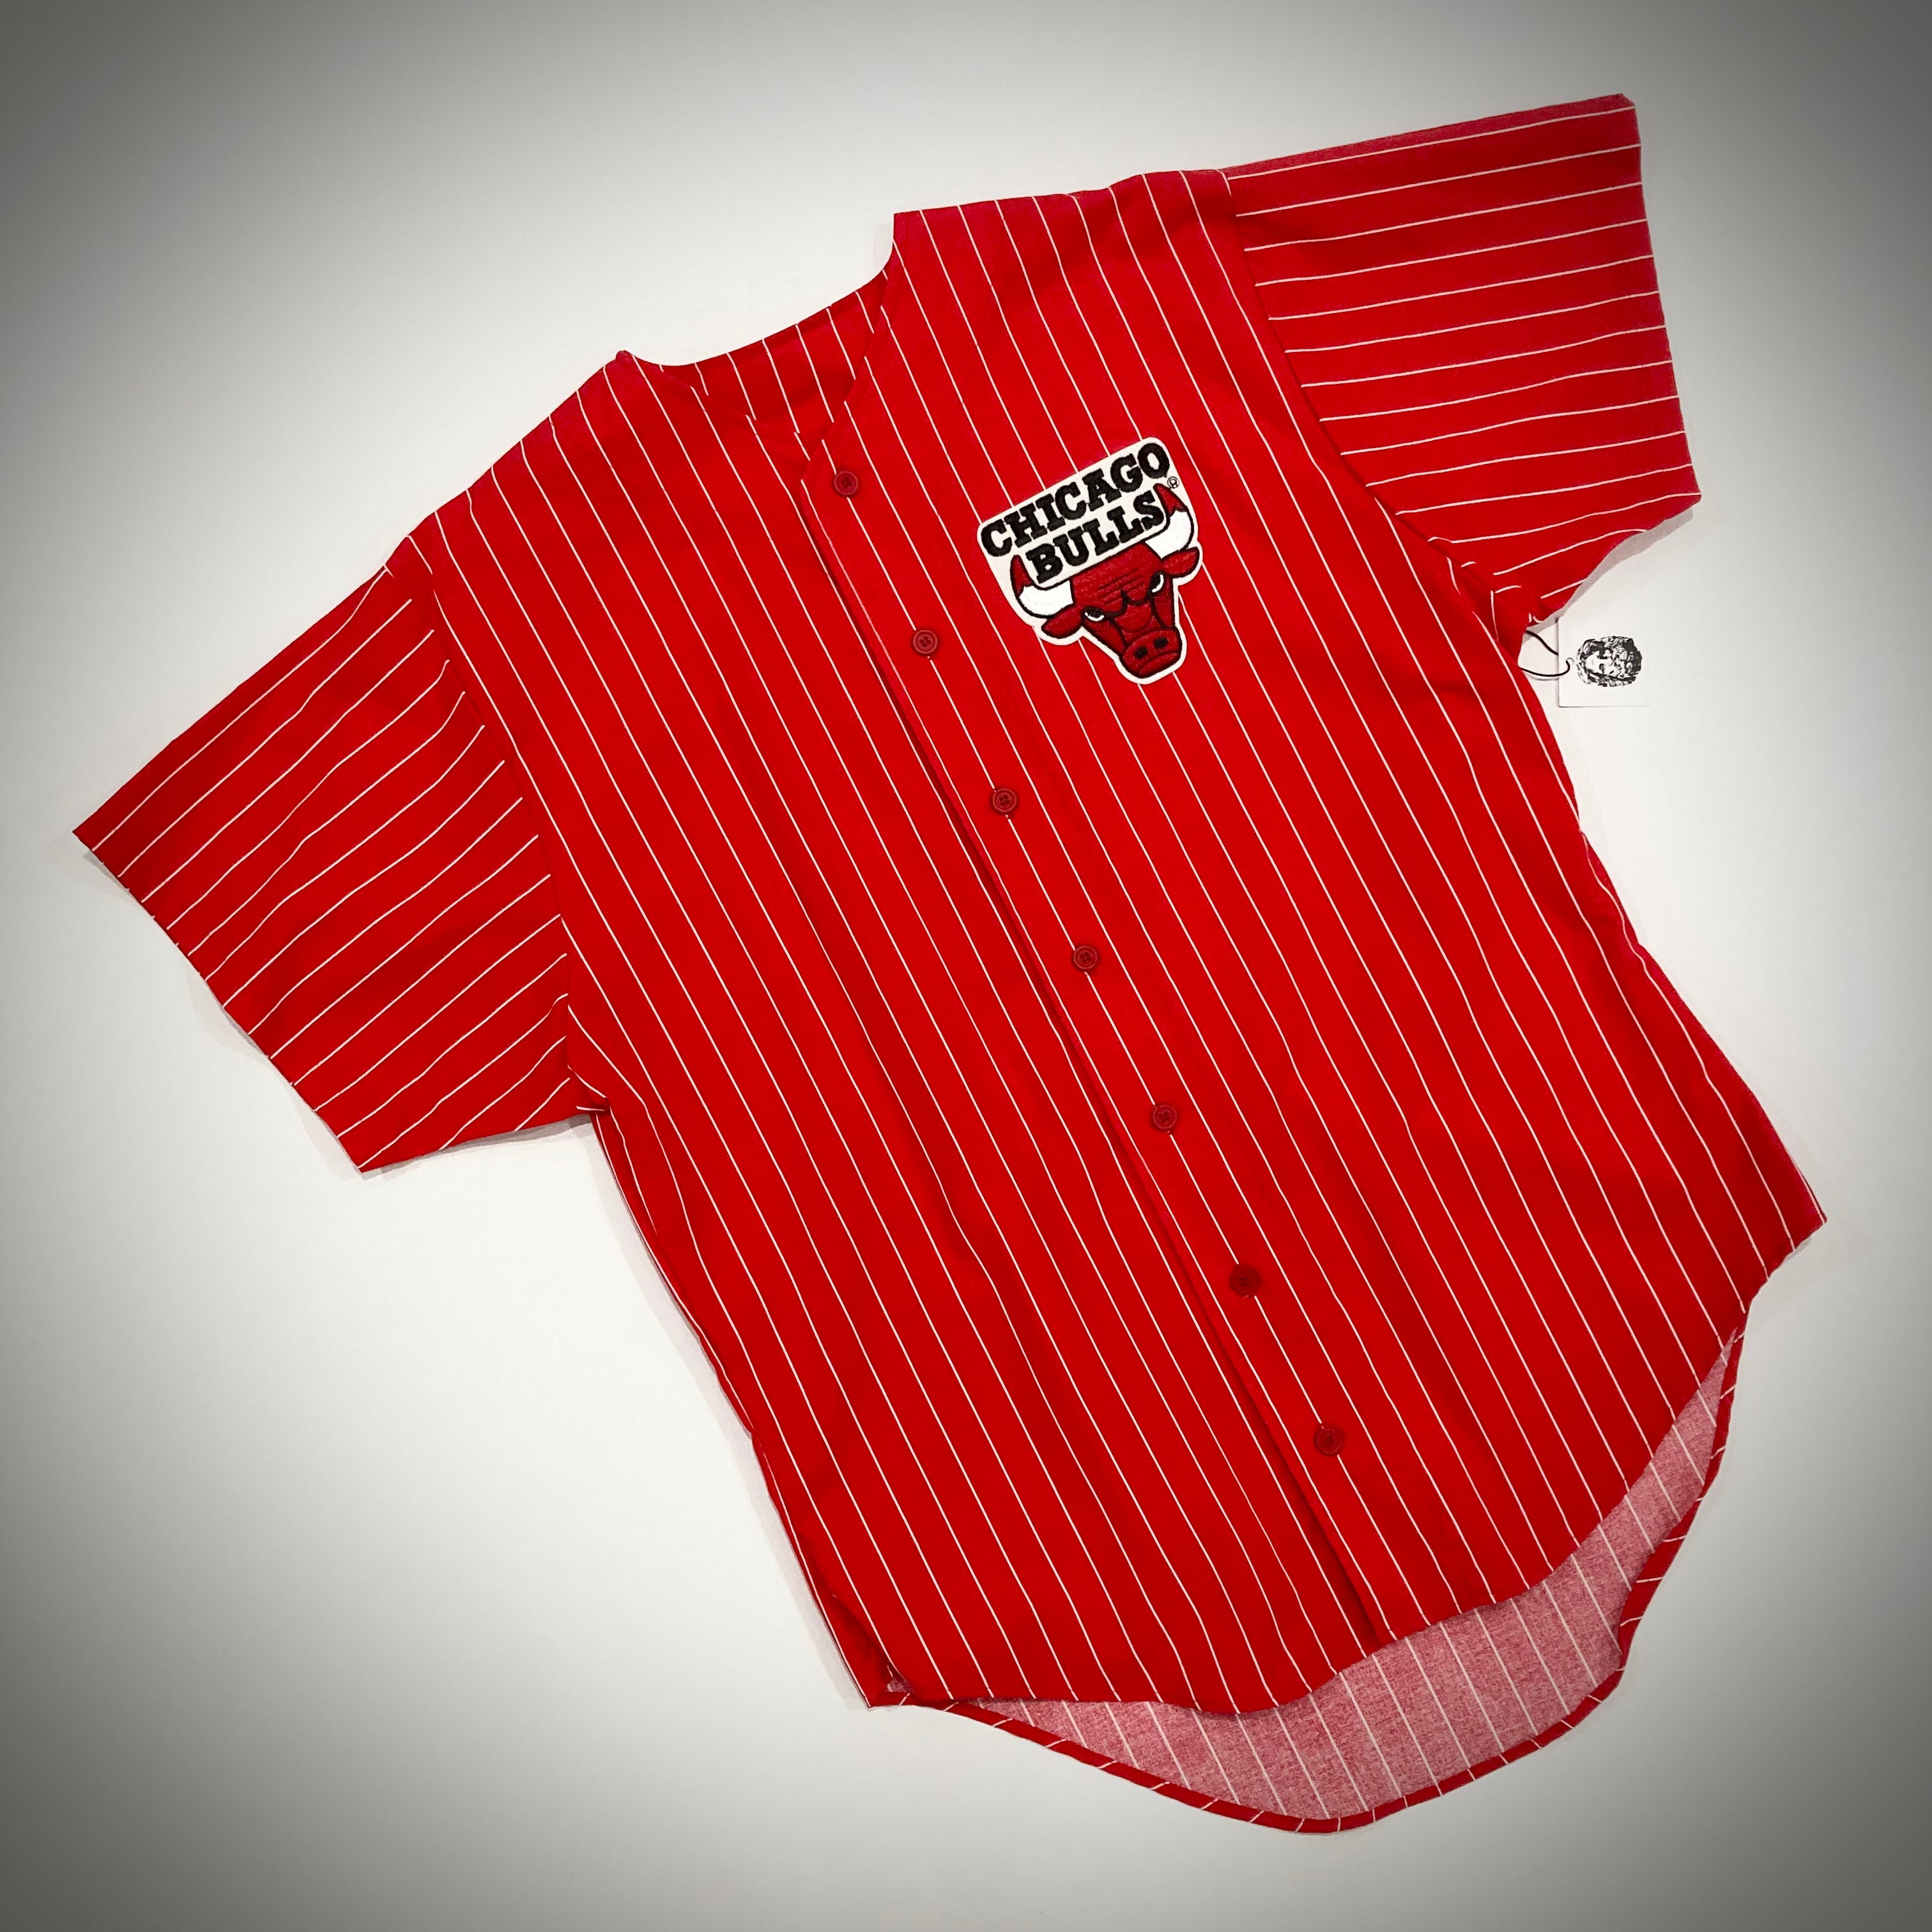 red chicago baseball jersey